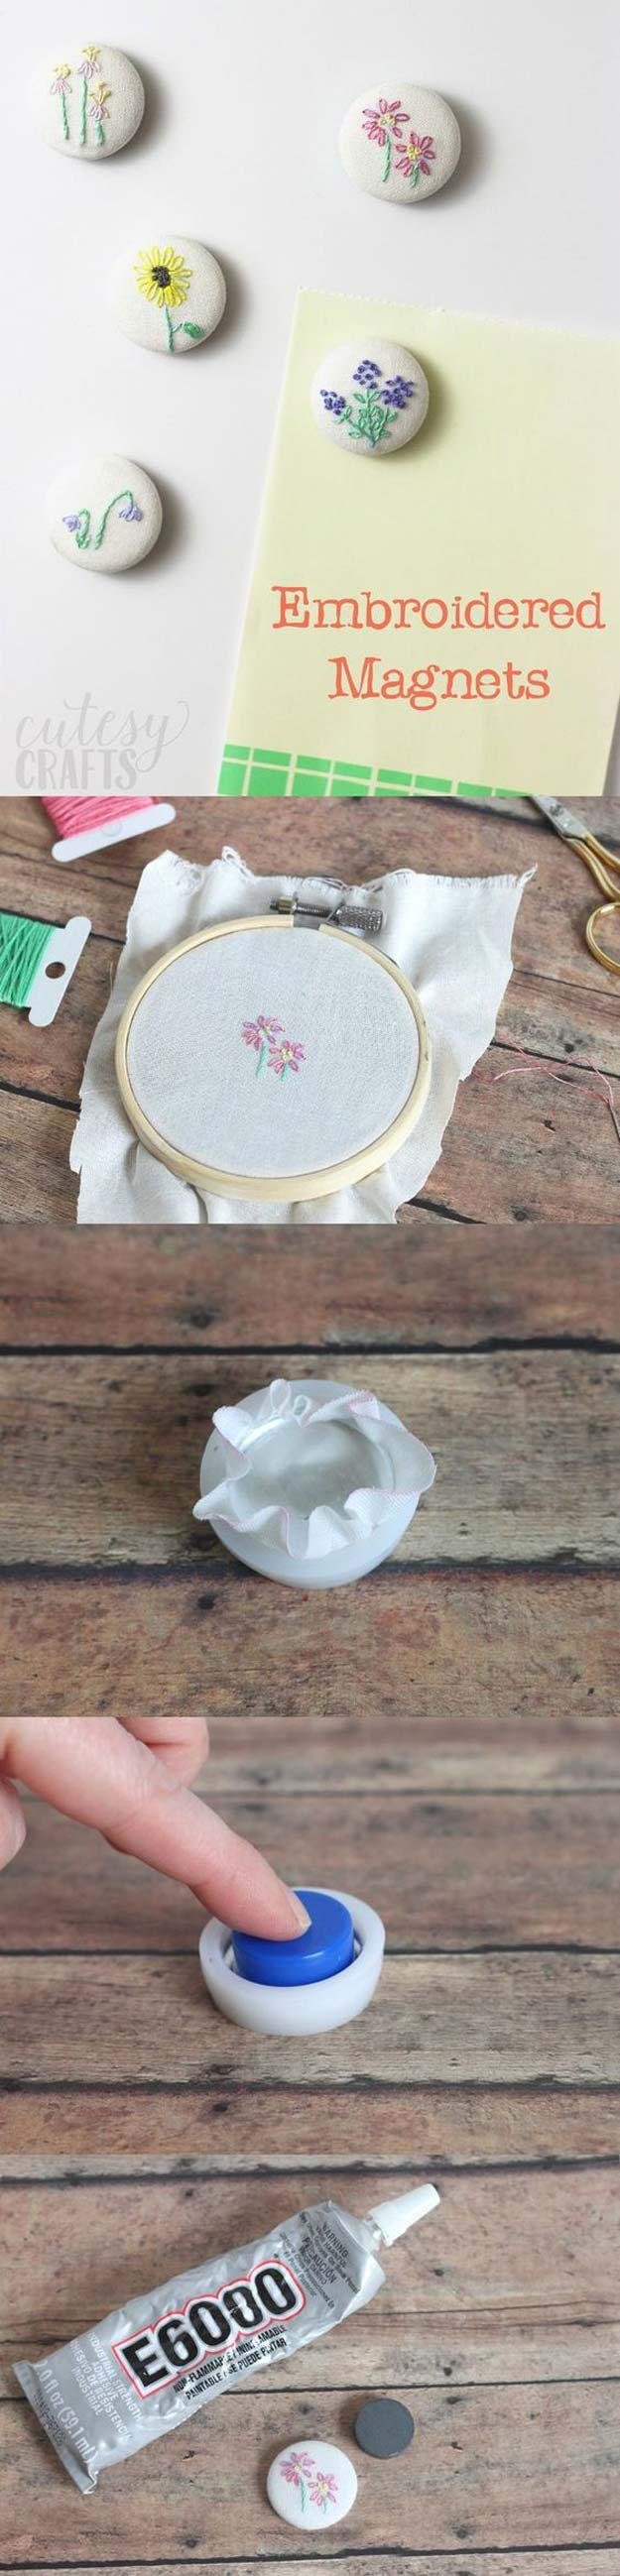 Funny Embroidery Patterns 26 Cool Diy Embroidery Projects And Crafts